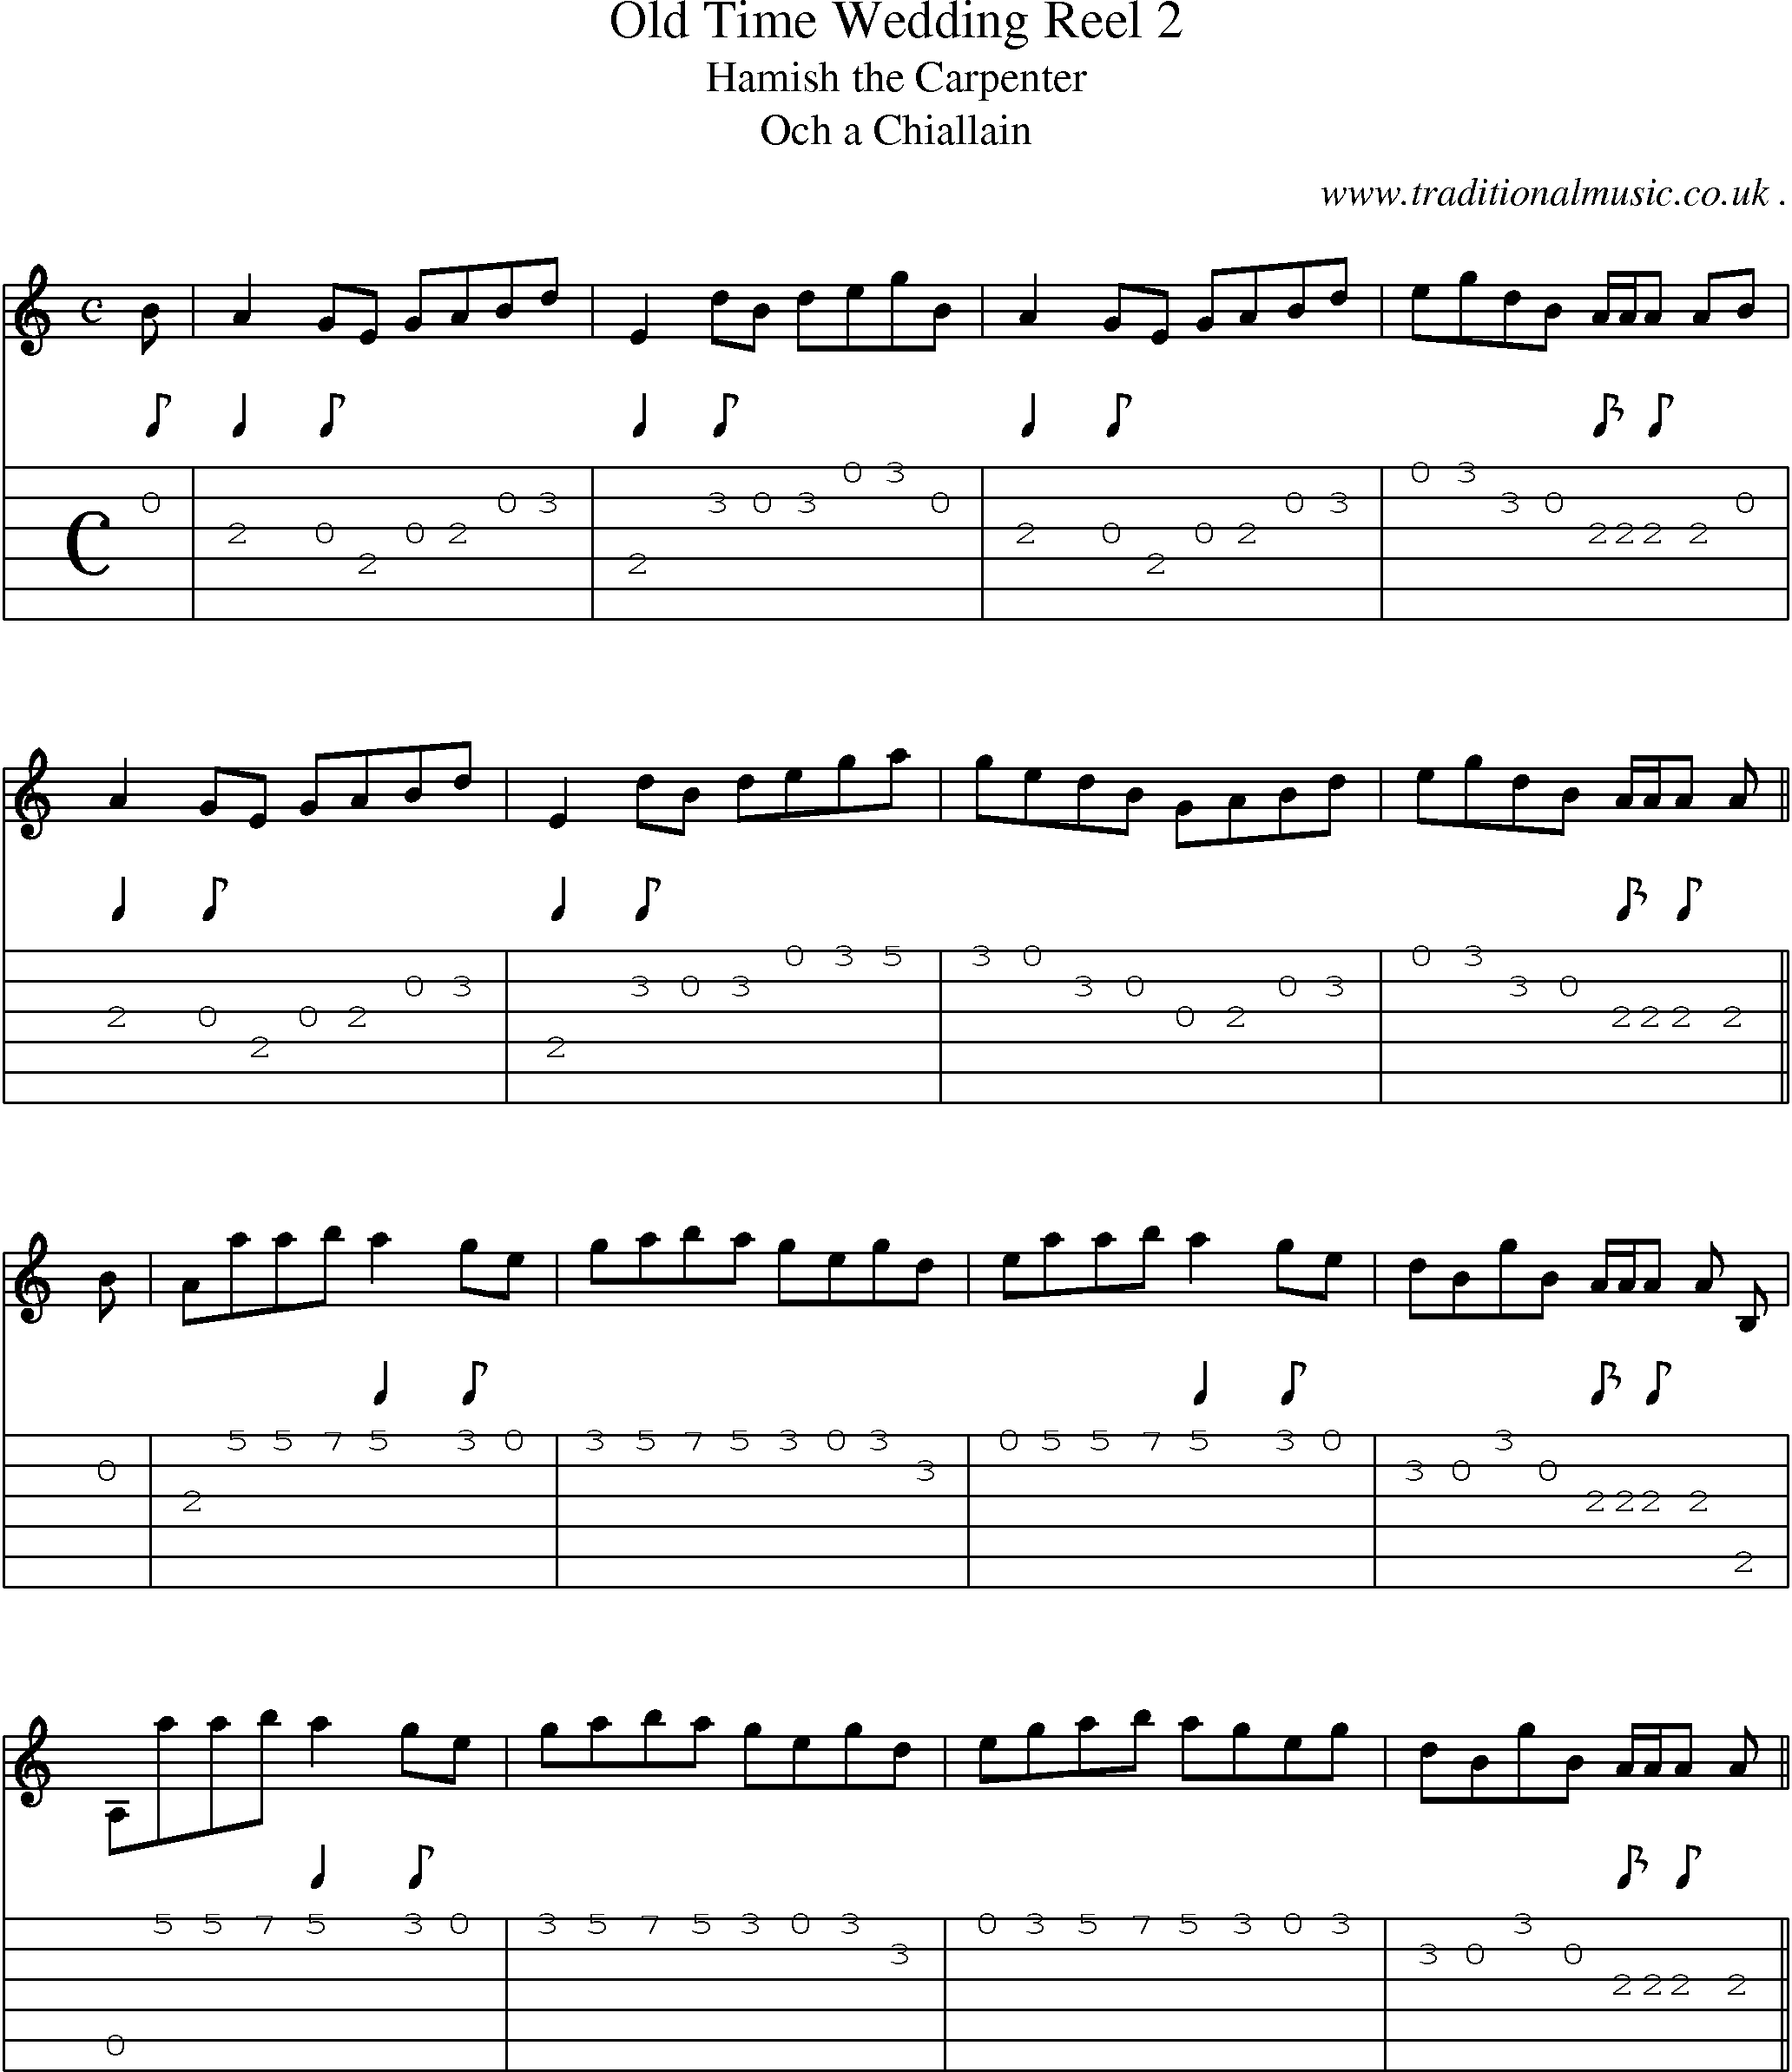 Music Score and Guitar Tabs for Old Time Wedding Reel 2